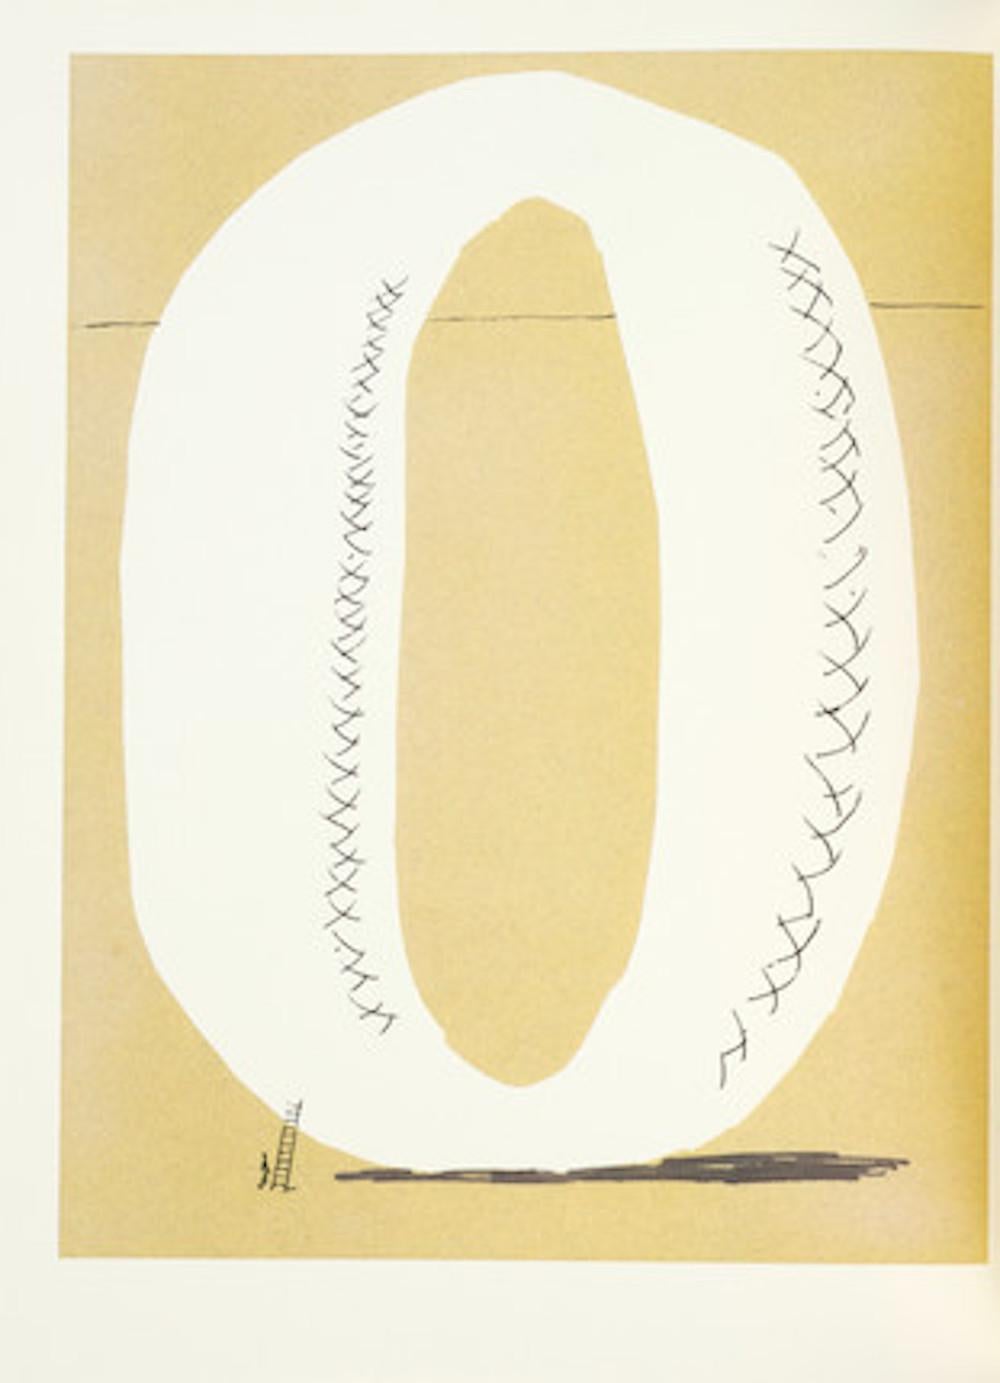 Hockney's Alphabet, portfolio of 26 lithographs signed by Hockney and 23 writers For Sale 9